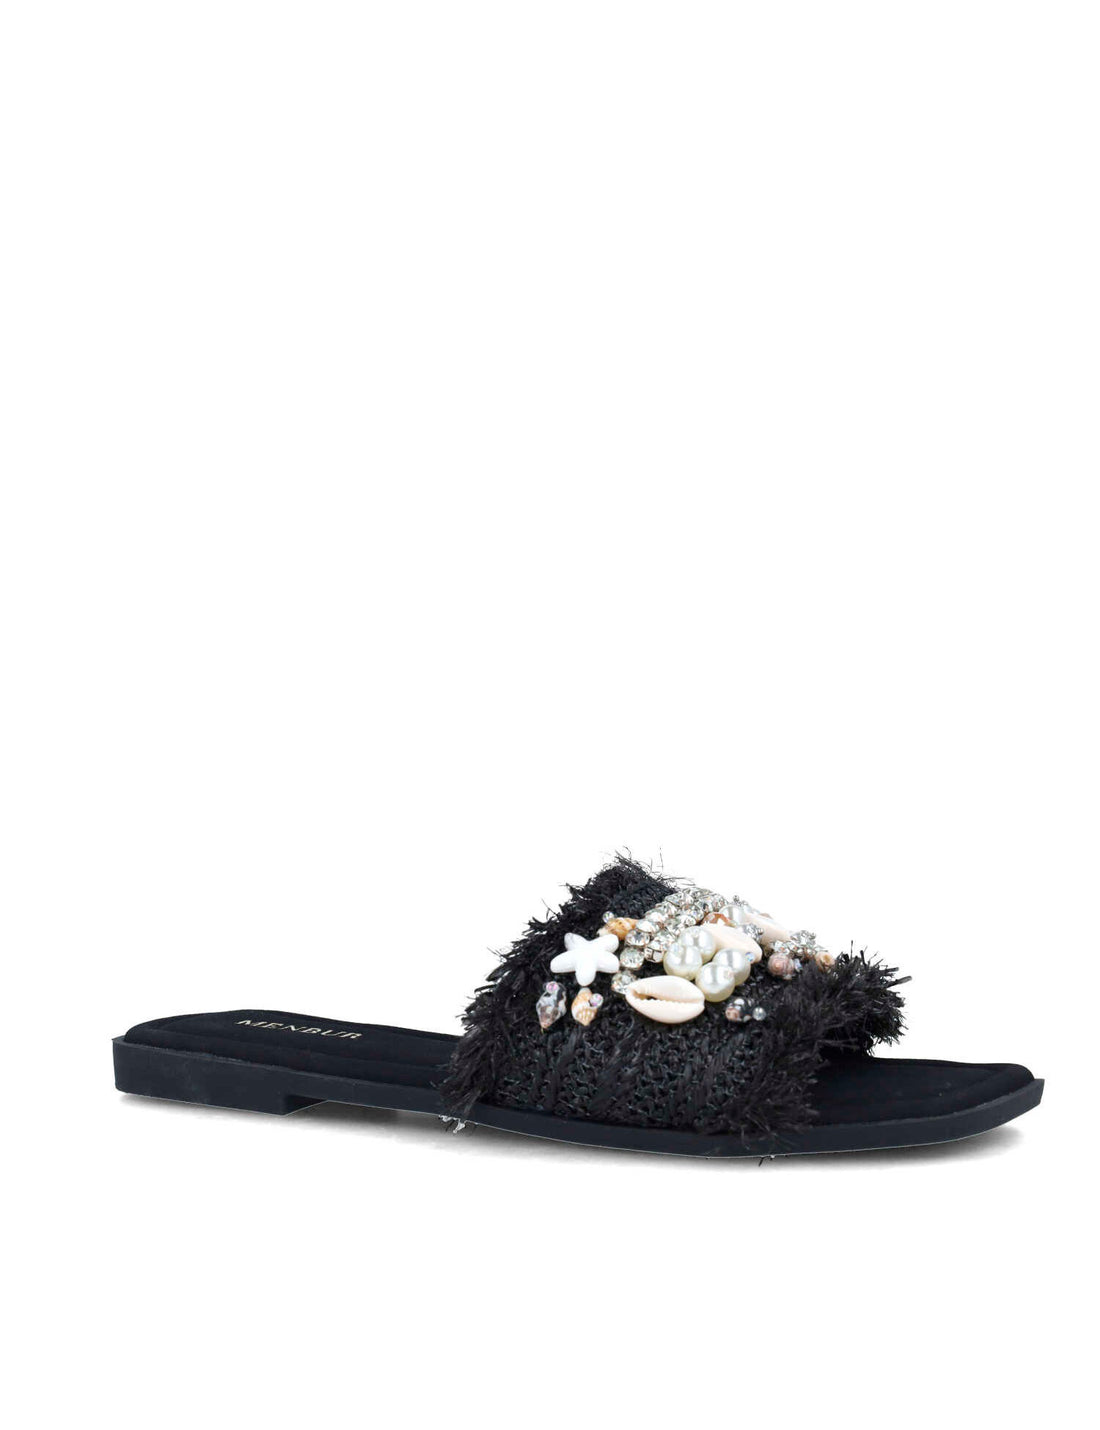 Black Slippers With Embellishments_25386_01_02